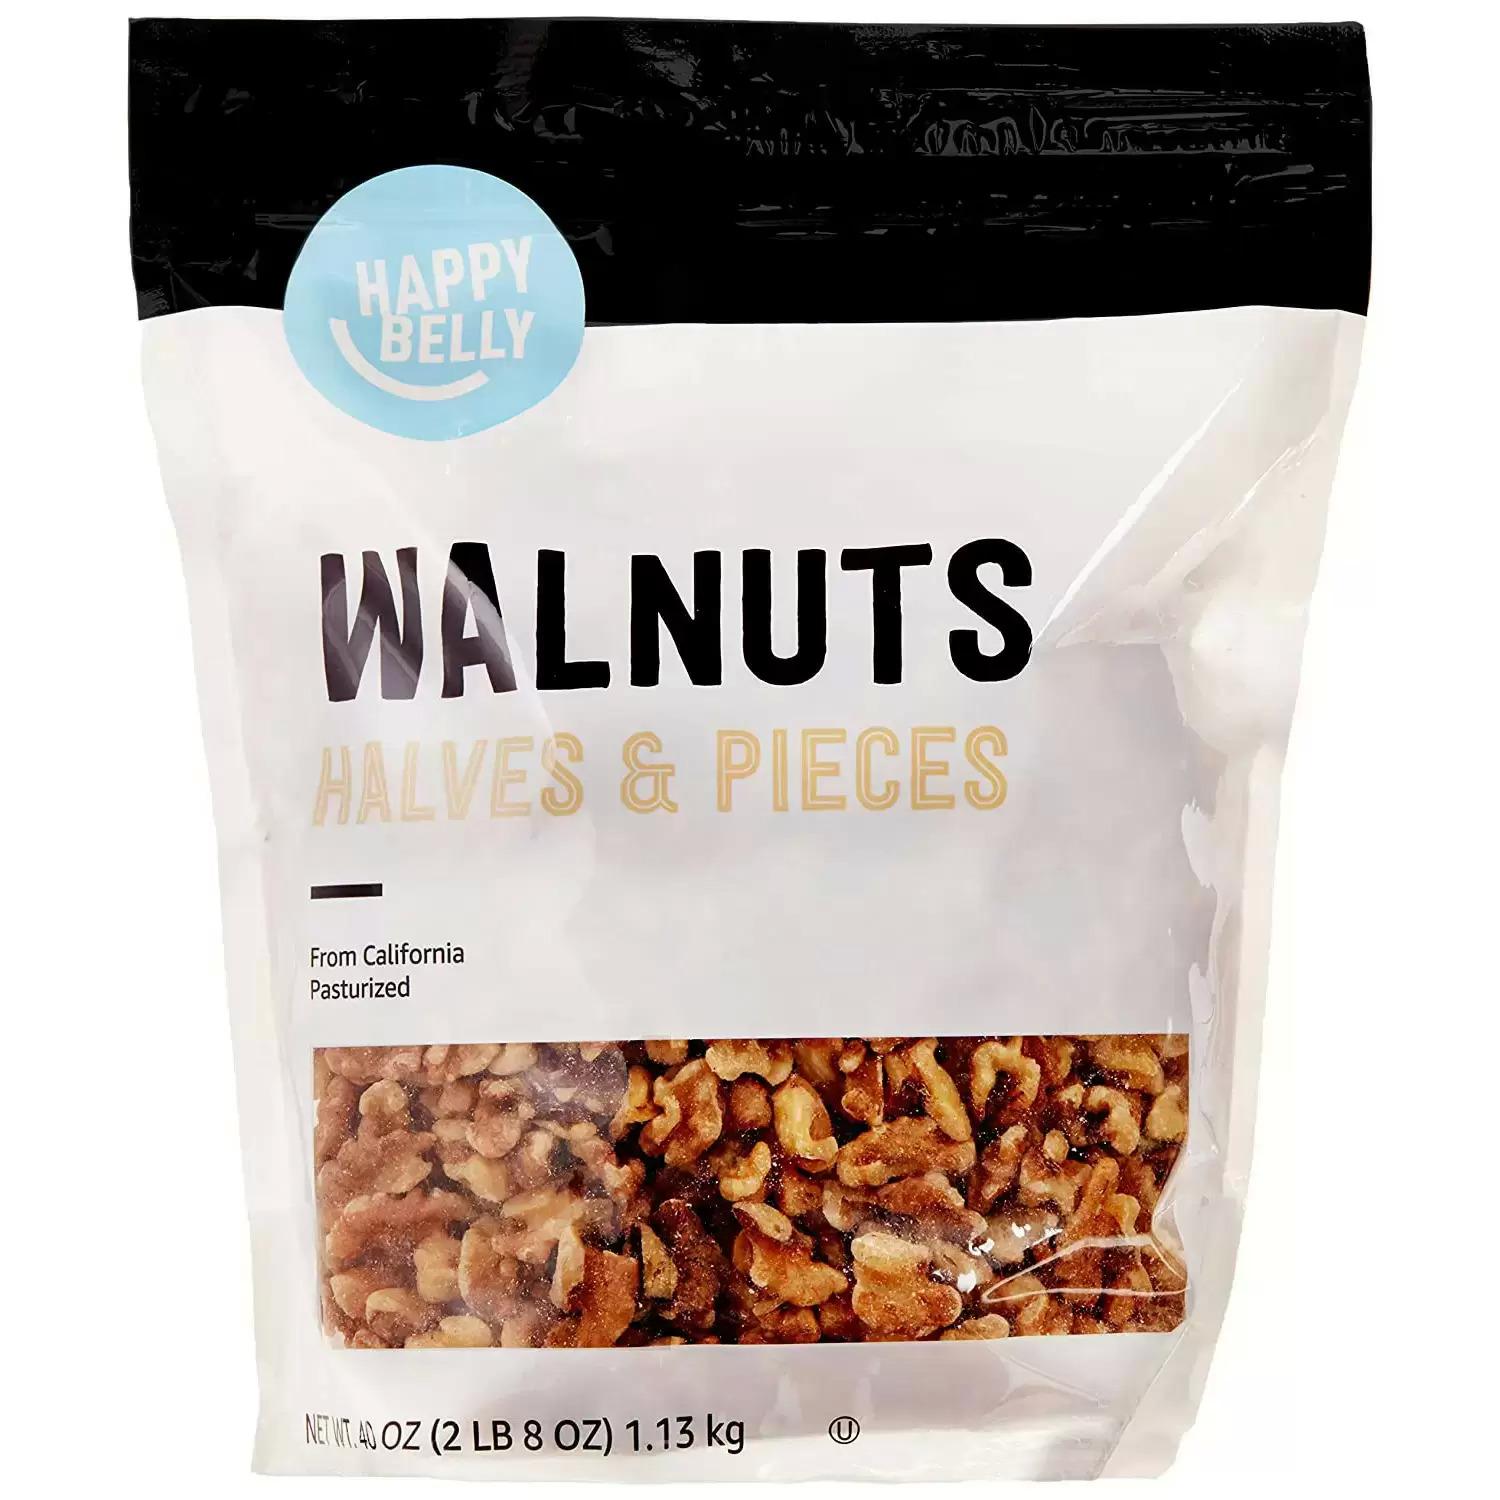 Happy Belly California Walnuts for $10.48 Shipped